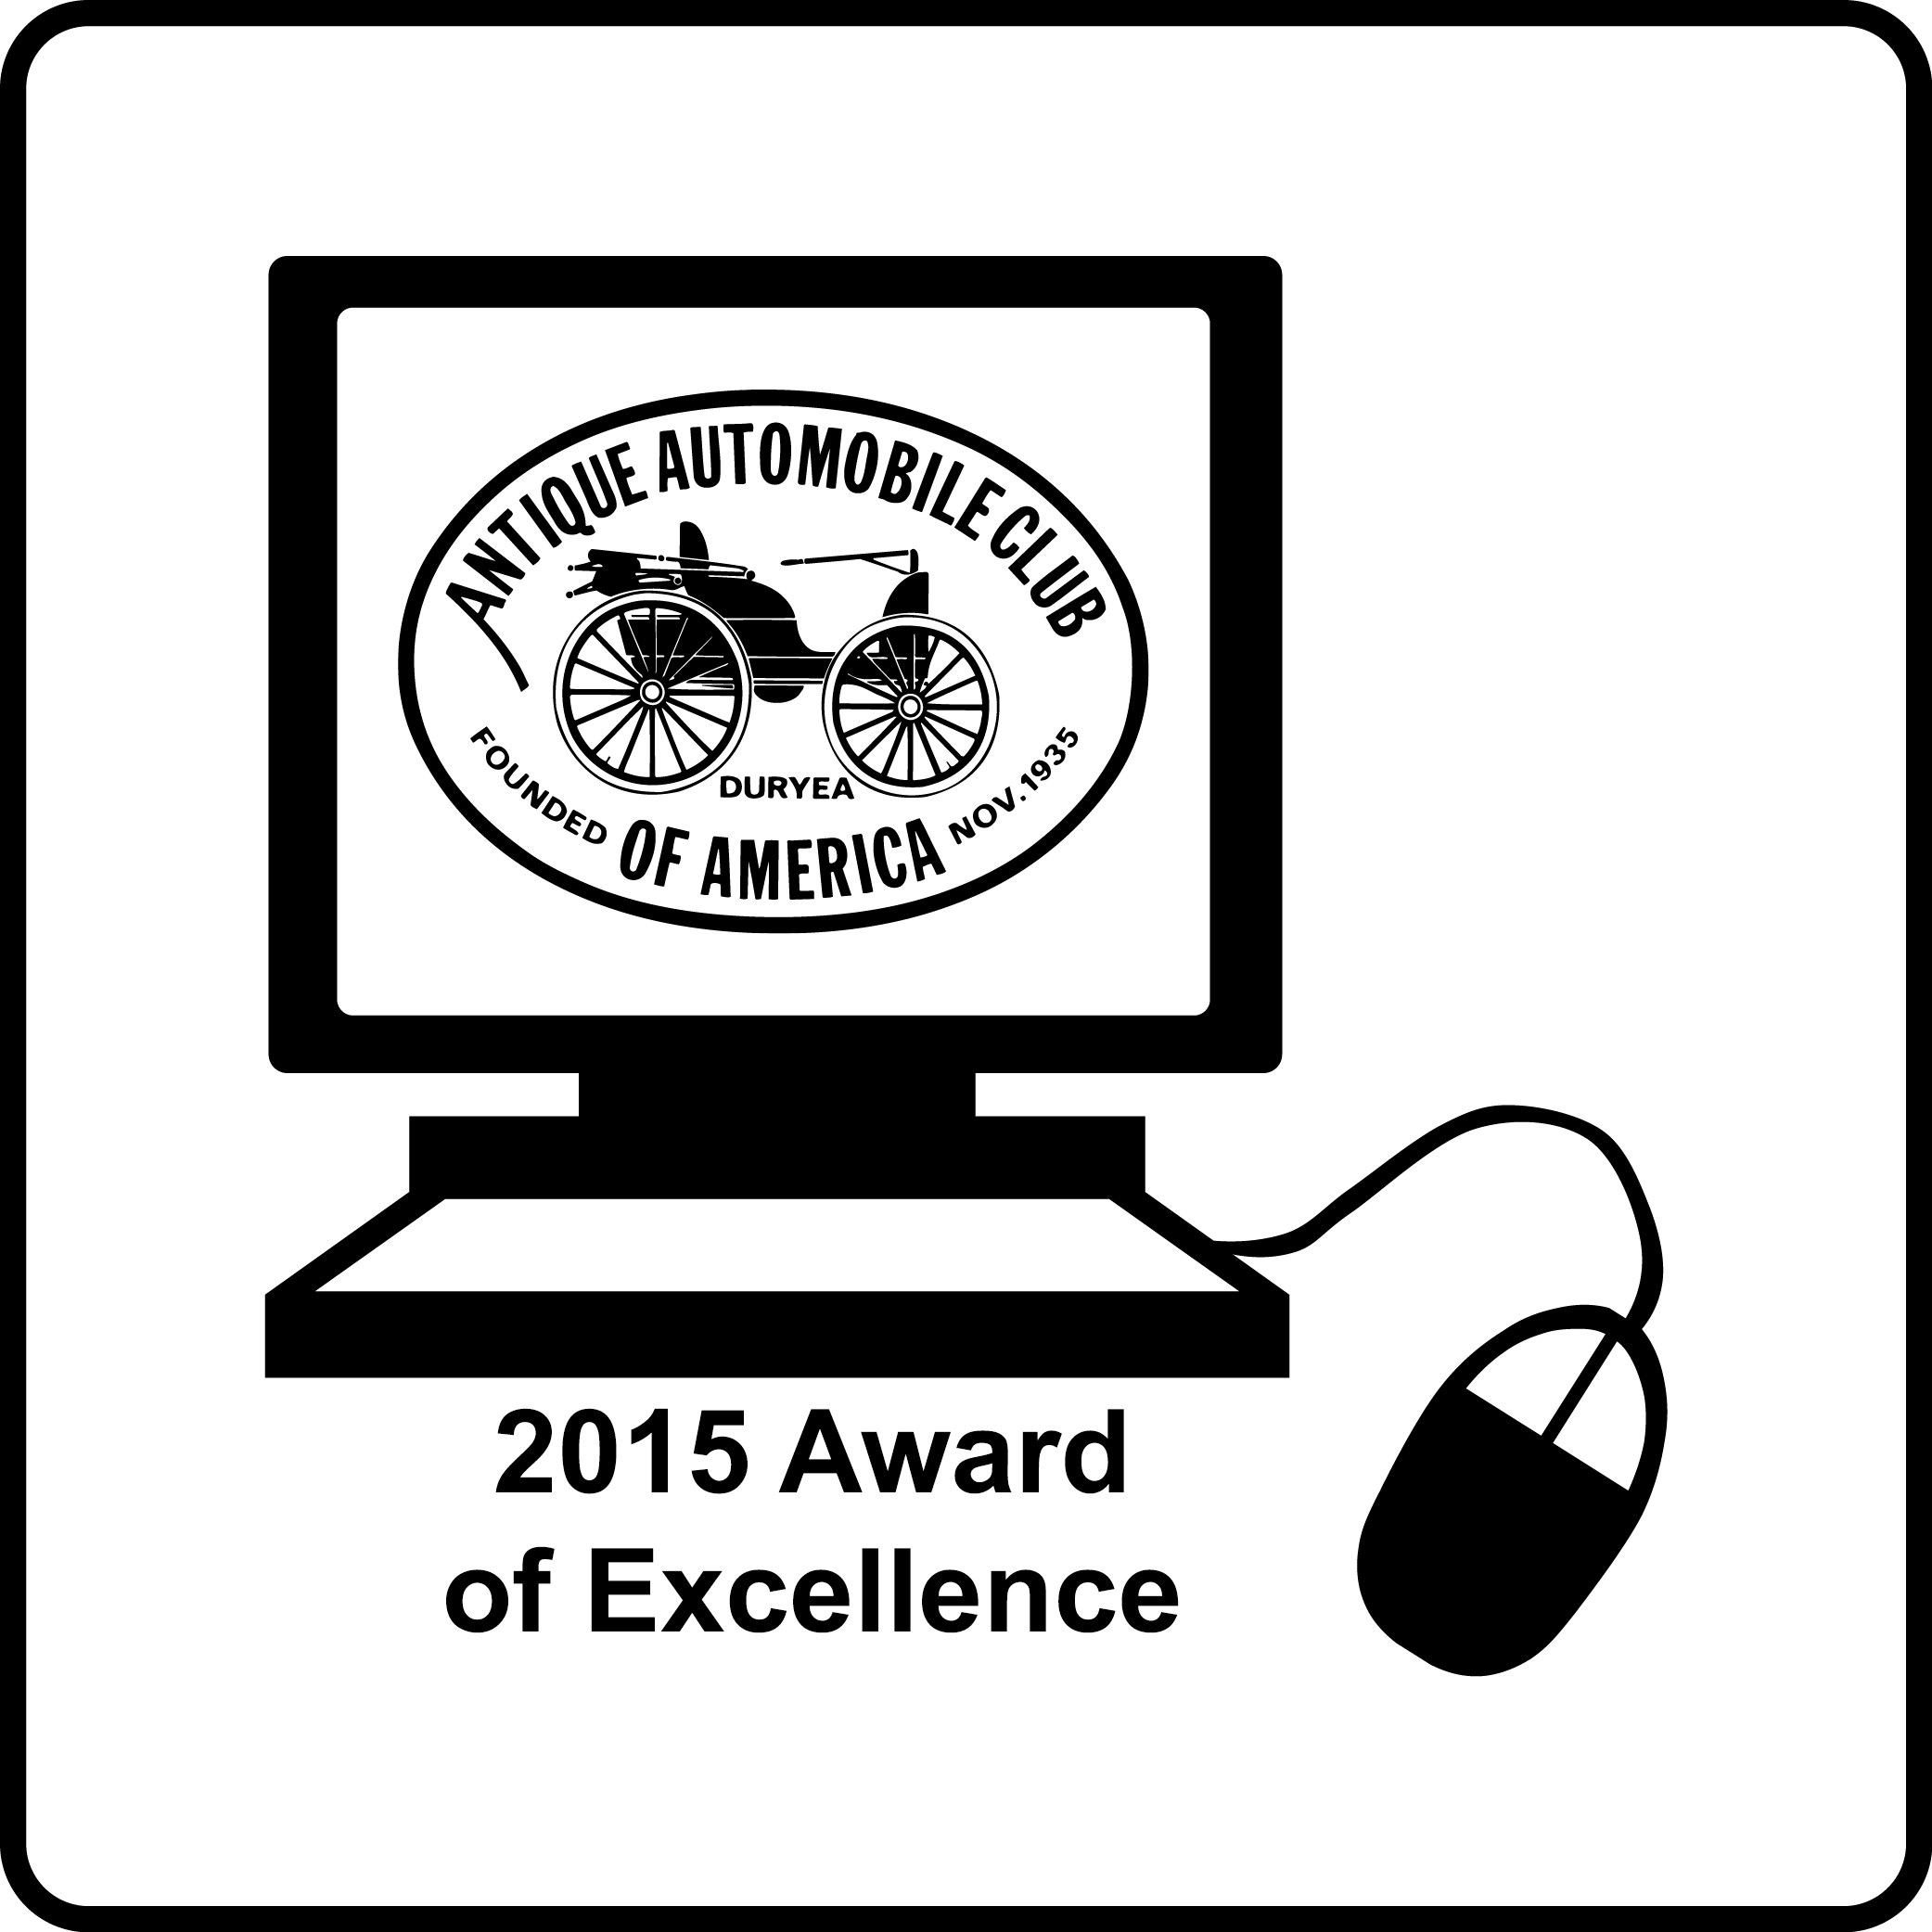 2014 Web Award of Excellence